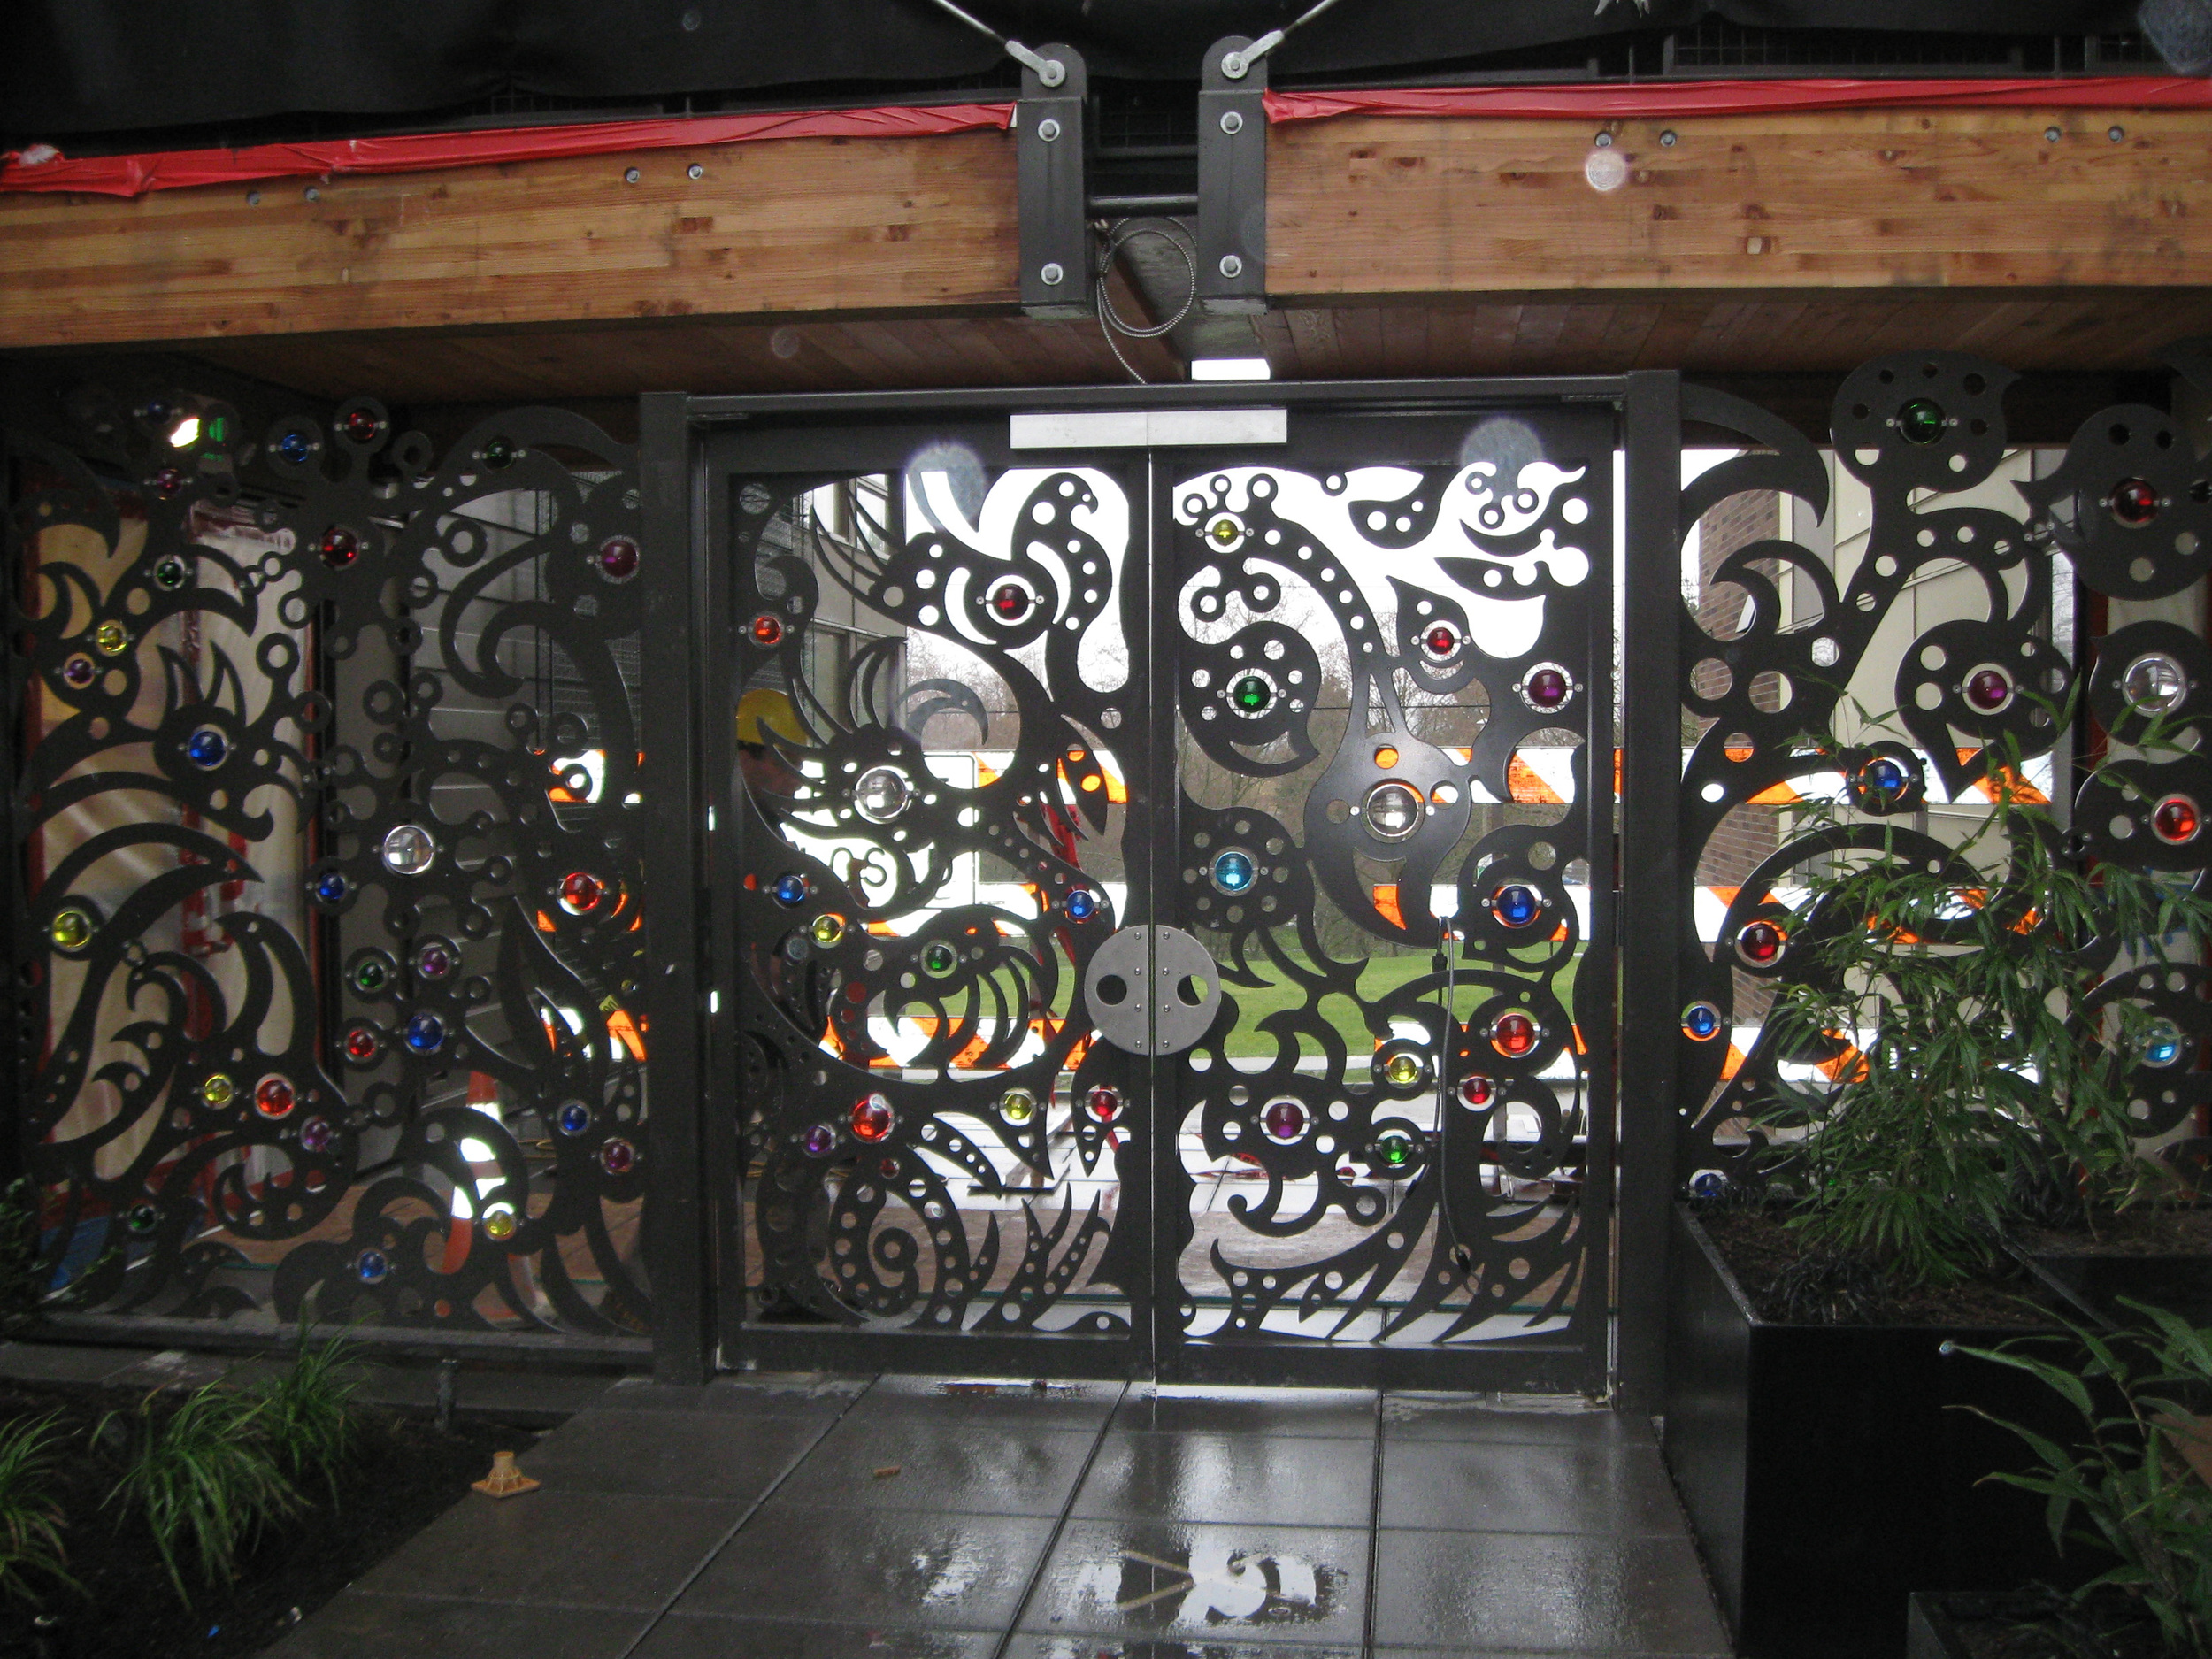  "Station Building Courtyard Gate", laser cut steel and glass, 25'x8', 2011 